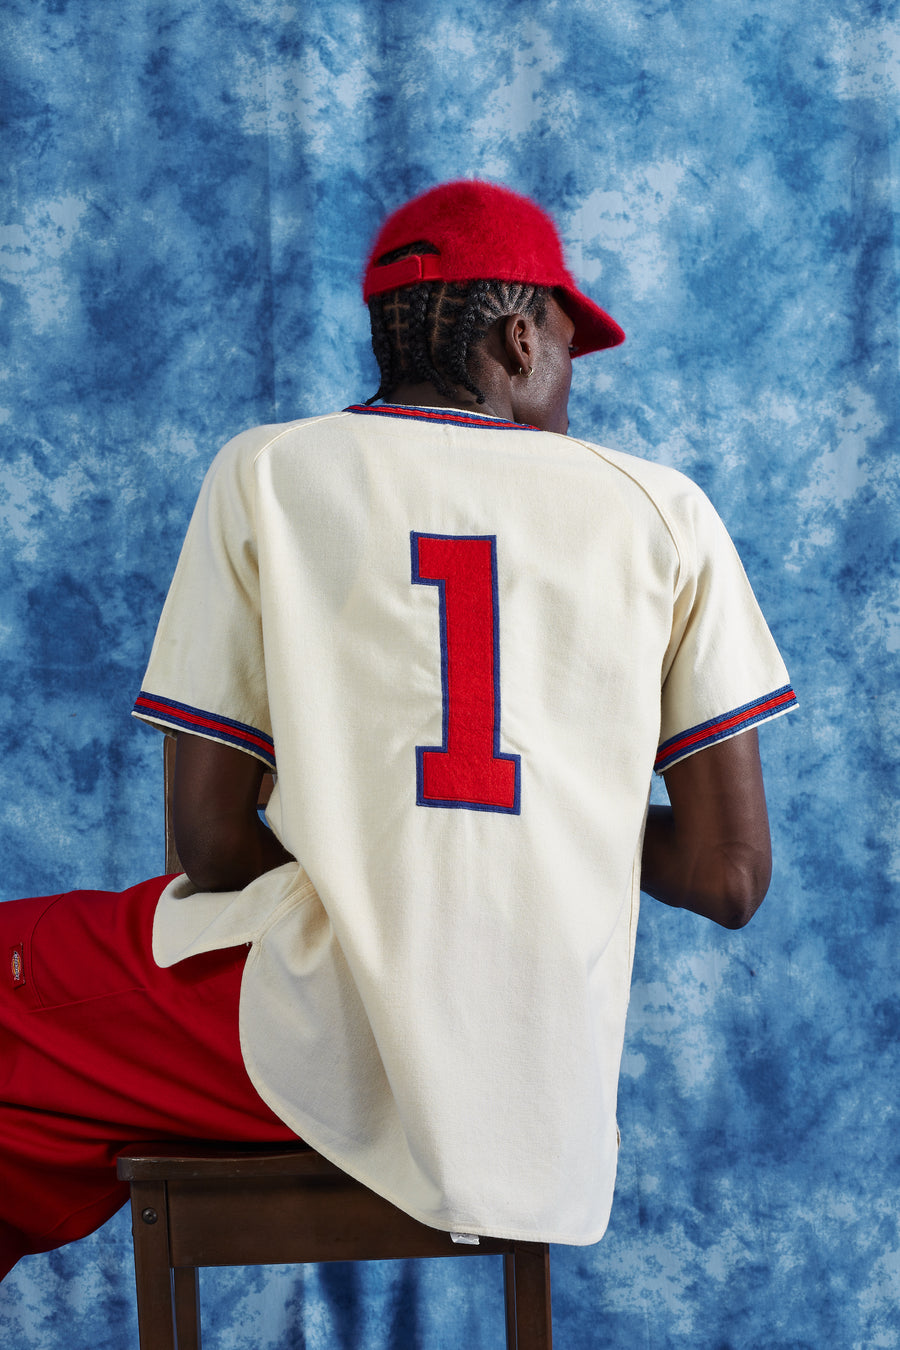 Vintage Authentic Mitchell & Ness Phillies Richie Ashburn Jersey in a vintage style from thrift store Twise Studio